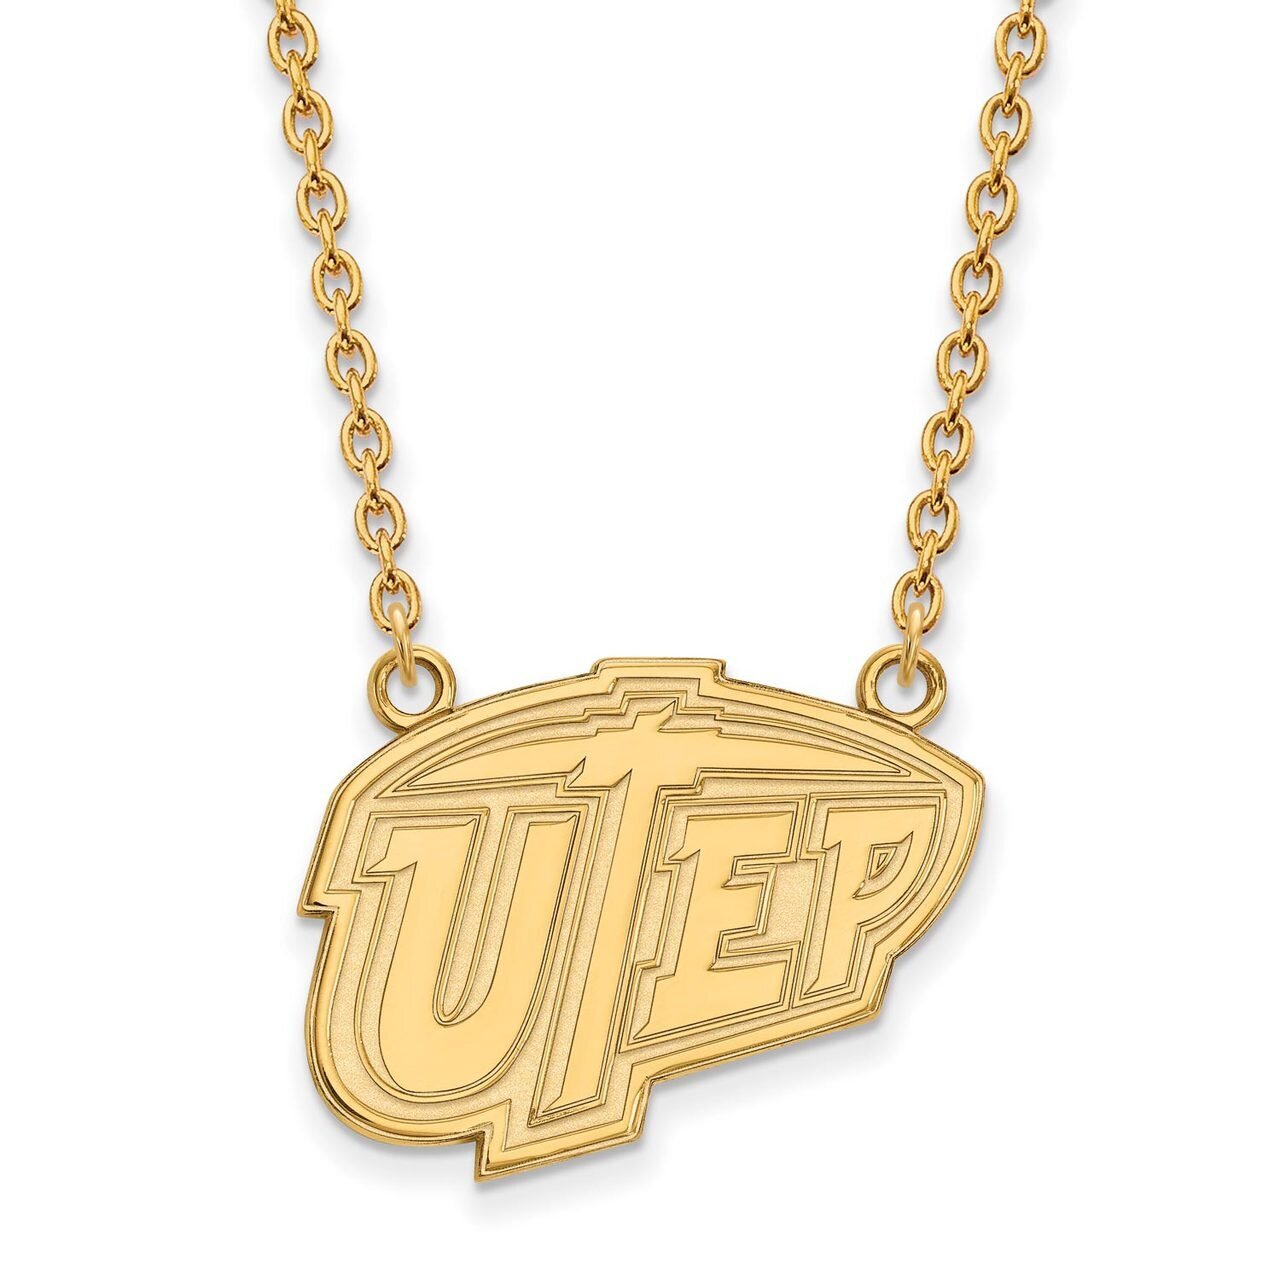 The University of Texas at El Paso Large Pendant with Chain Necklace 14k Yellow Gold 4Y009UTE-18